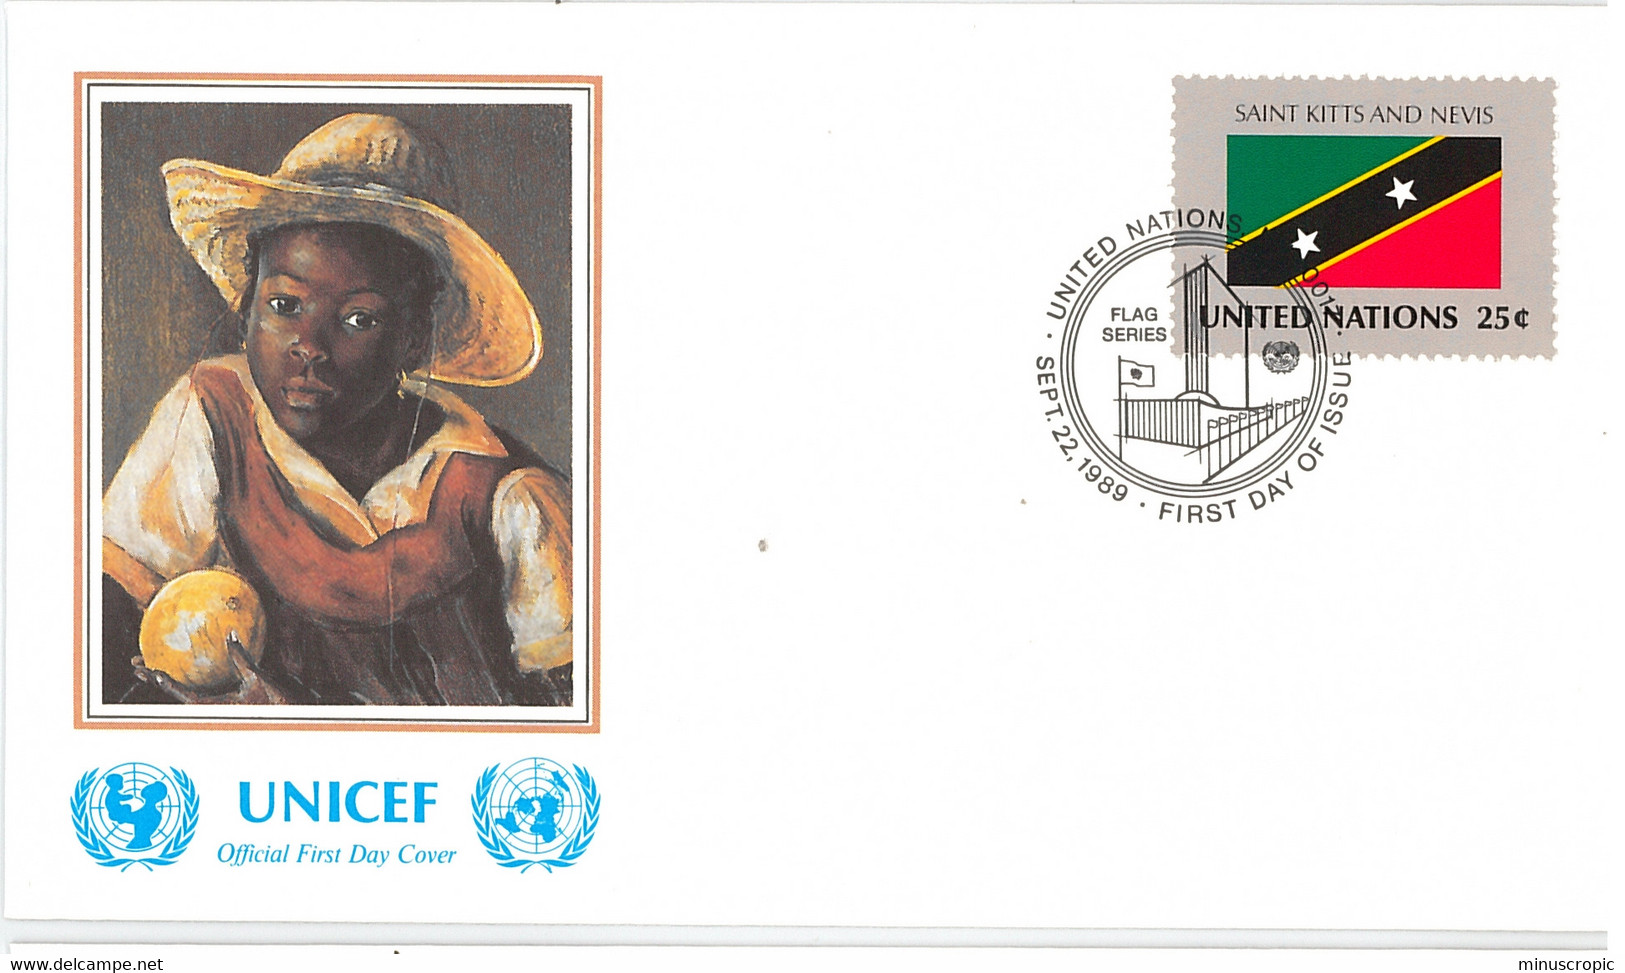 Enveloppe FDC United Nations - UNICEF - Flag Series 13/89 - Saint Kitts And Nevis - 1989 - Briefe U. Dokumente